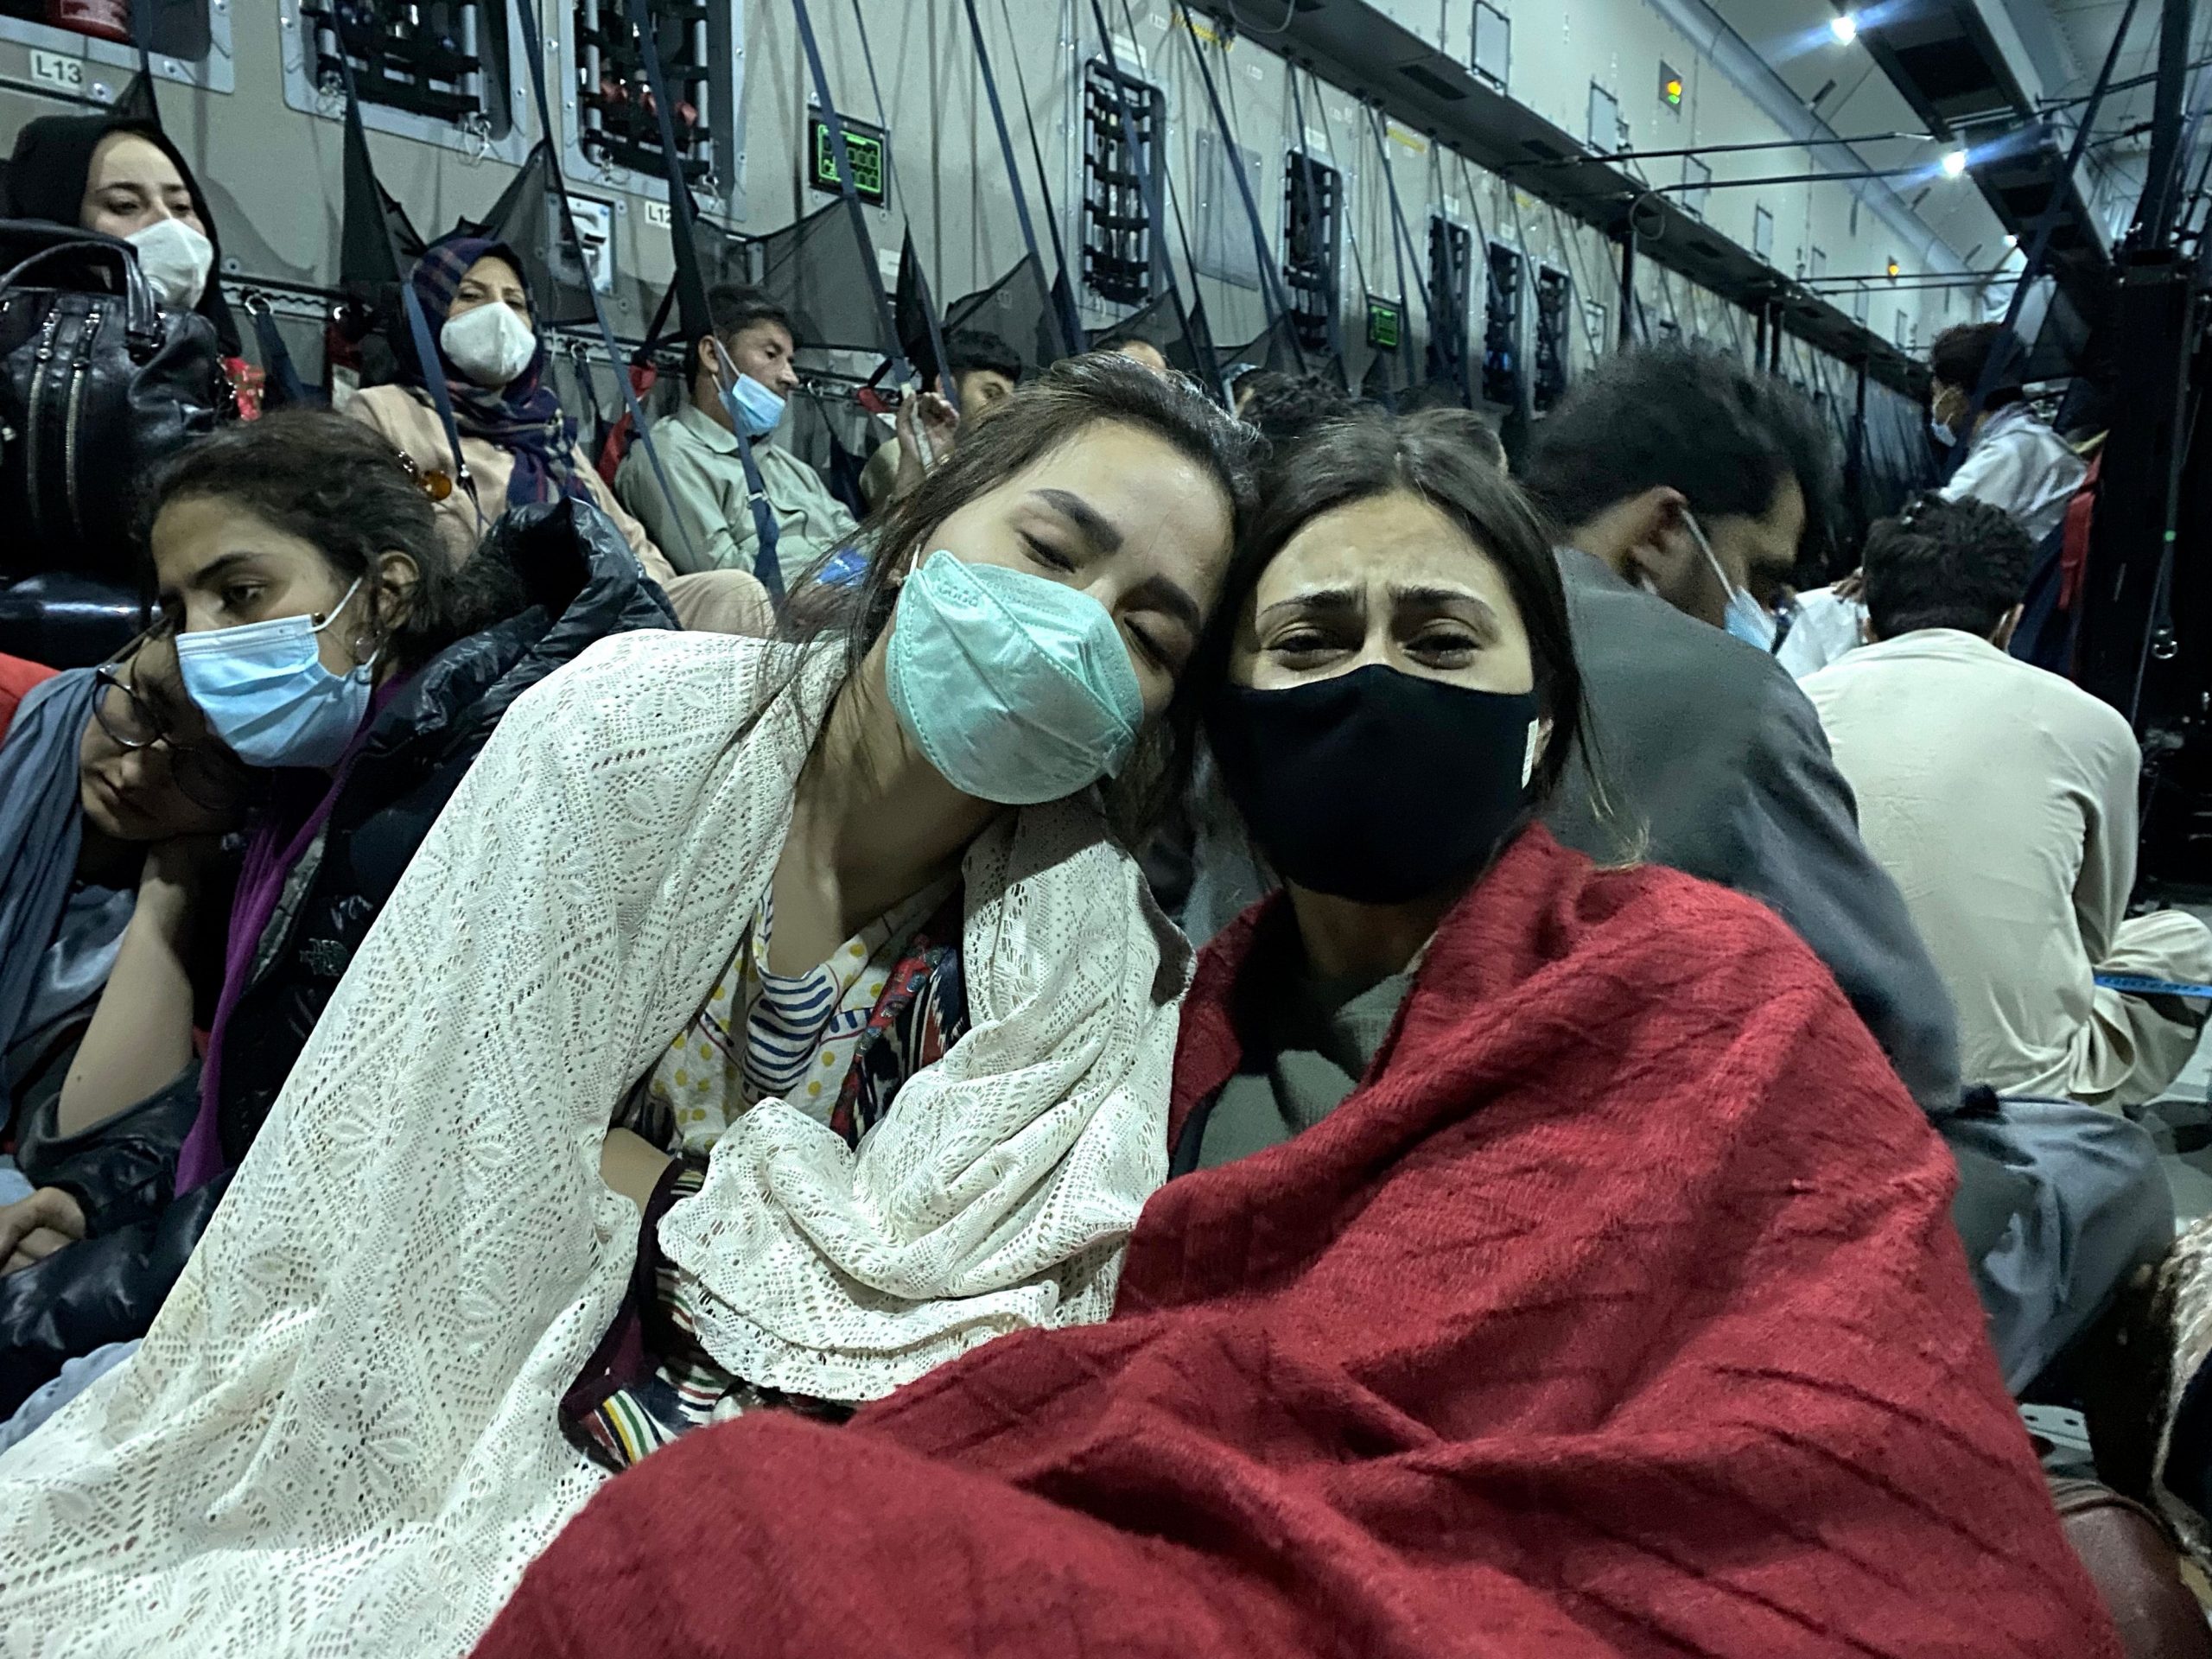 Two women, masked and draped in blankets, lean against one another amid a crowd of travelers.